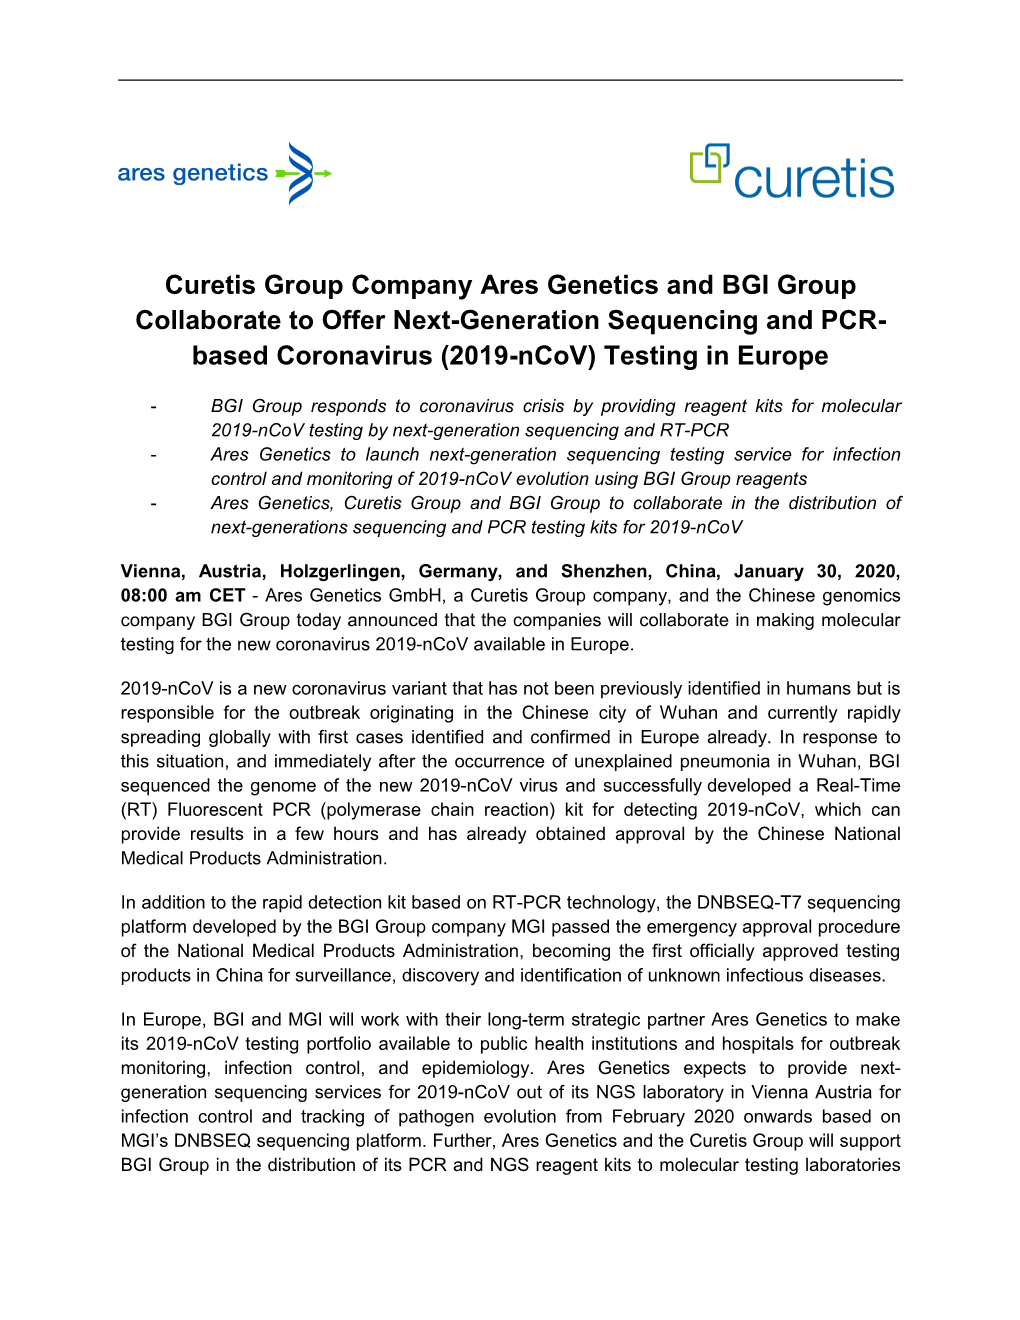 Curetis Group Company Ares Genetics and BGI Group Collaborate to Offer Next-Generation Sequencing and PCR- Based Coronavirus (2019-Ncov) Testing in Europe